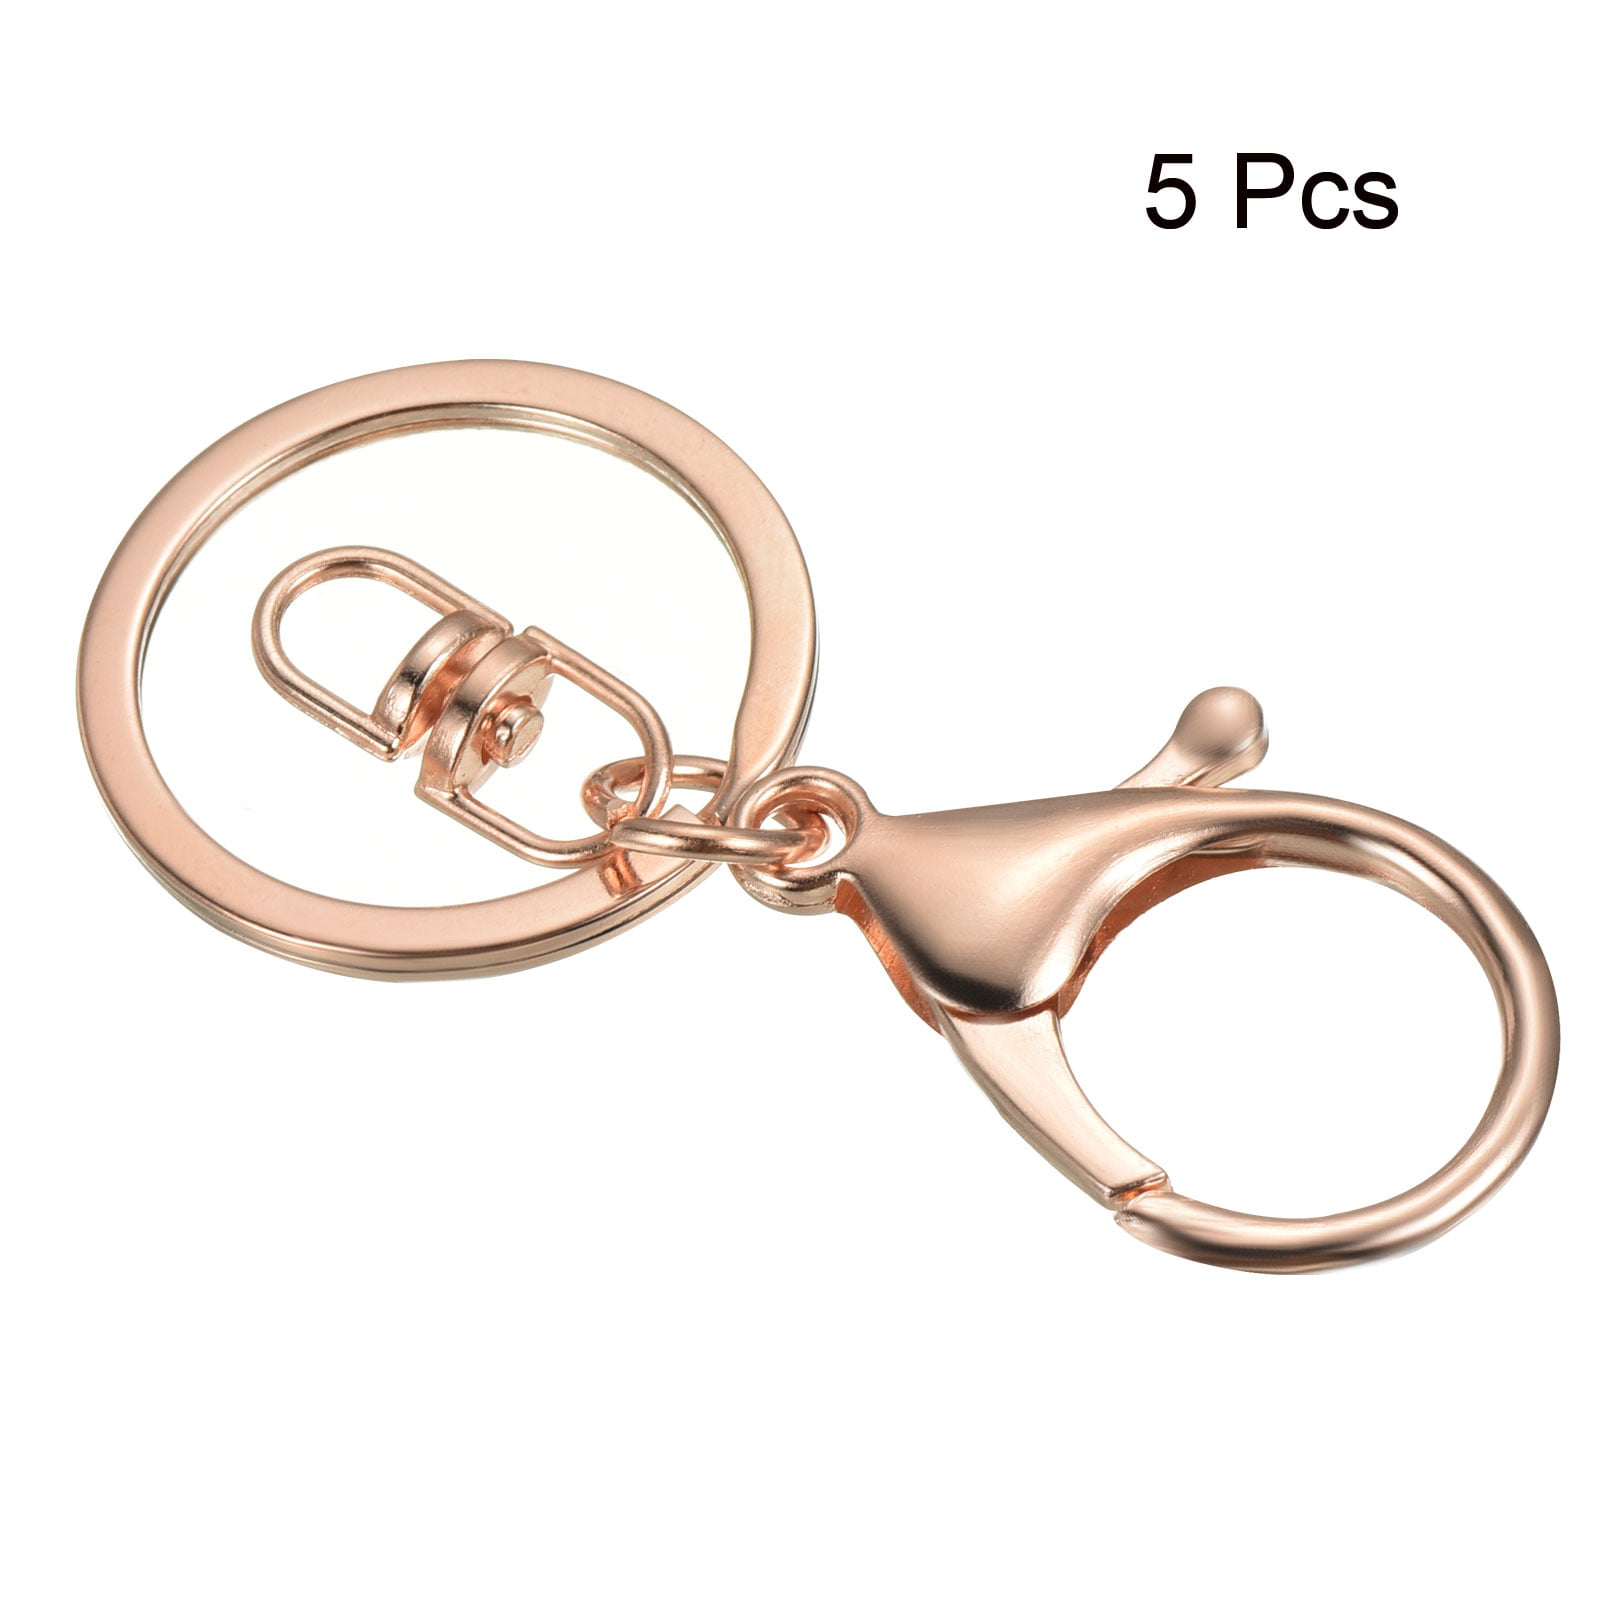 Caluya Design Lobster Clasp Keychain Champagne Gold / with Rings